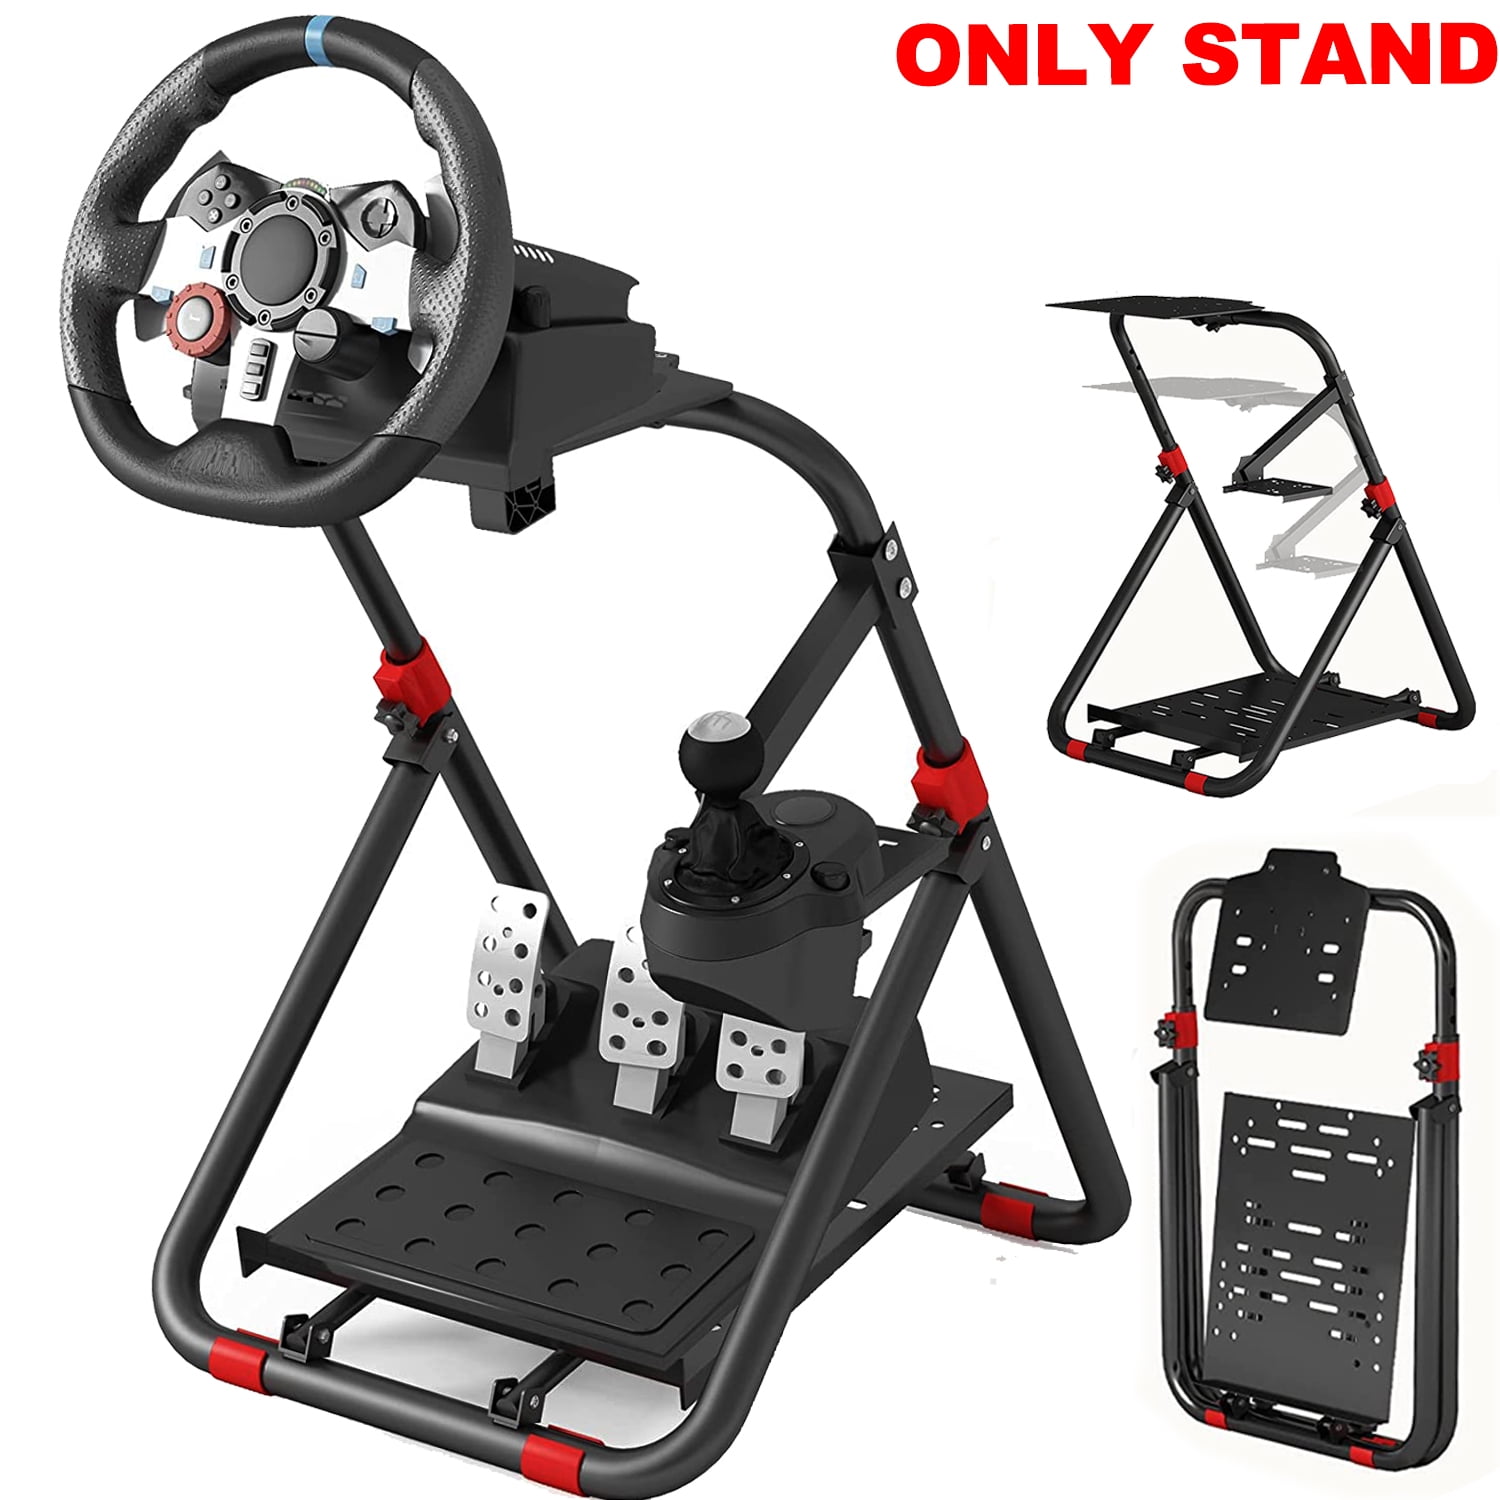 TSJUN Racing Steering Wheel Stand Collapsible Tilt-Adjustable Racing Simulator for Logitech G923 G920 G29 Racing For Thrustmaster T248X T248 T300 458 Xbox PC PS4 PS5 -